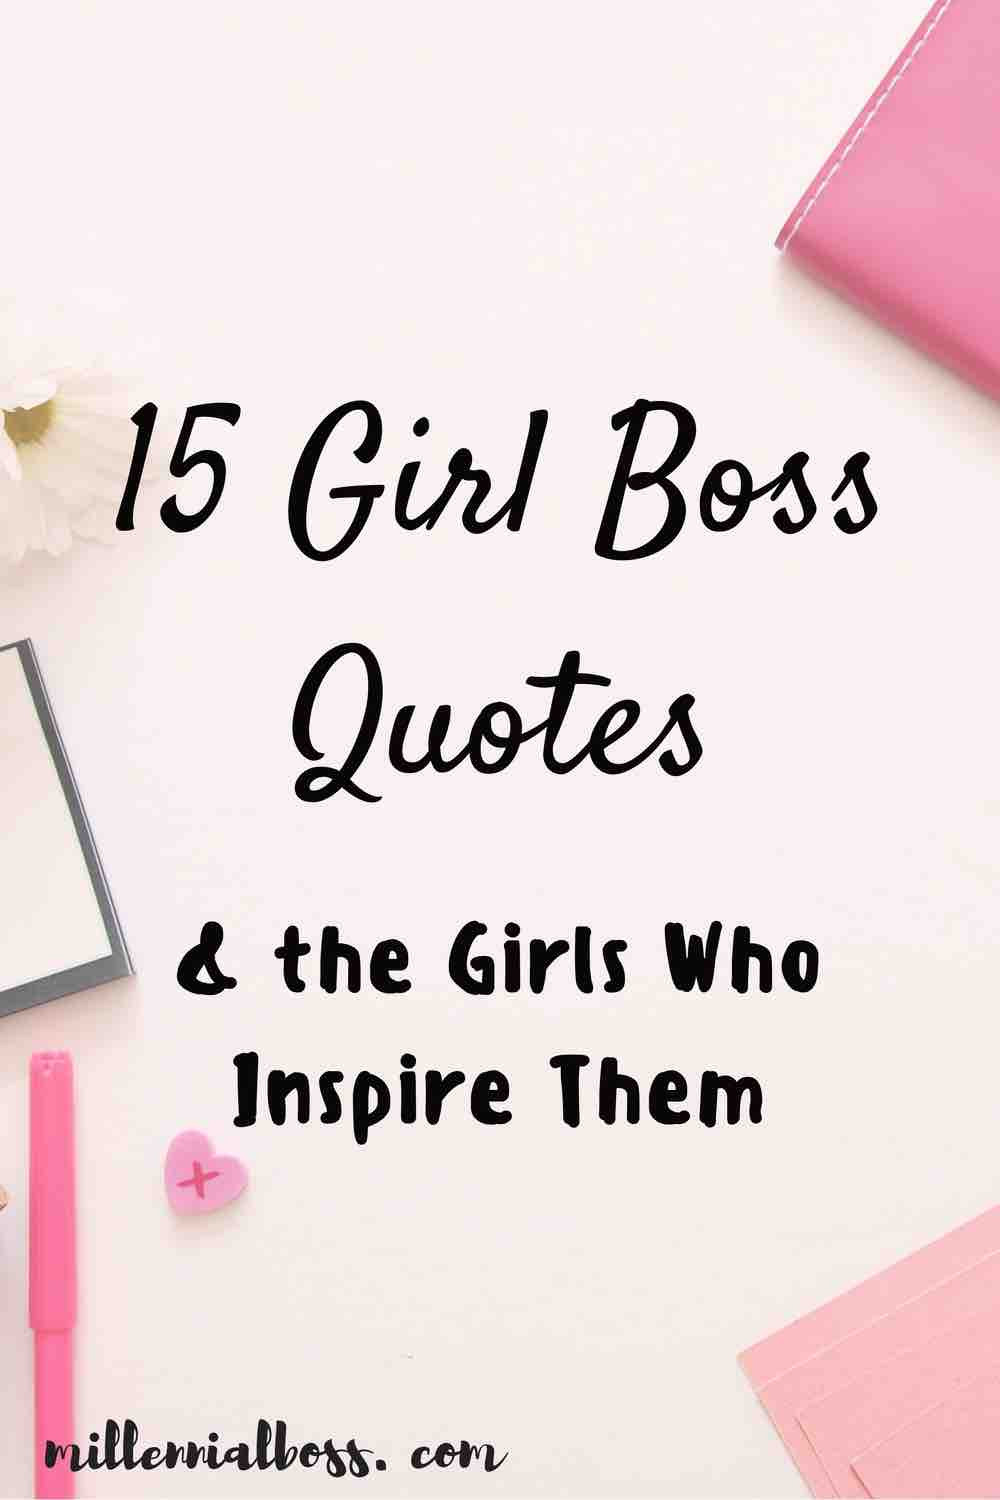 Girls Motivational Quotes
 15 Girl Boss Quotes & the Girls Who Inspire Them